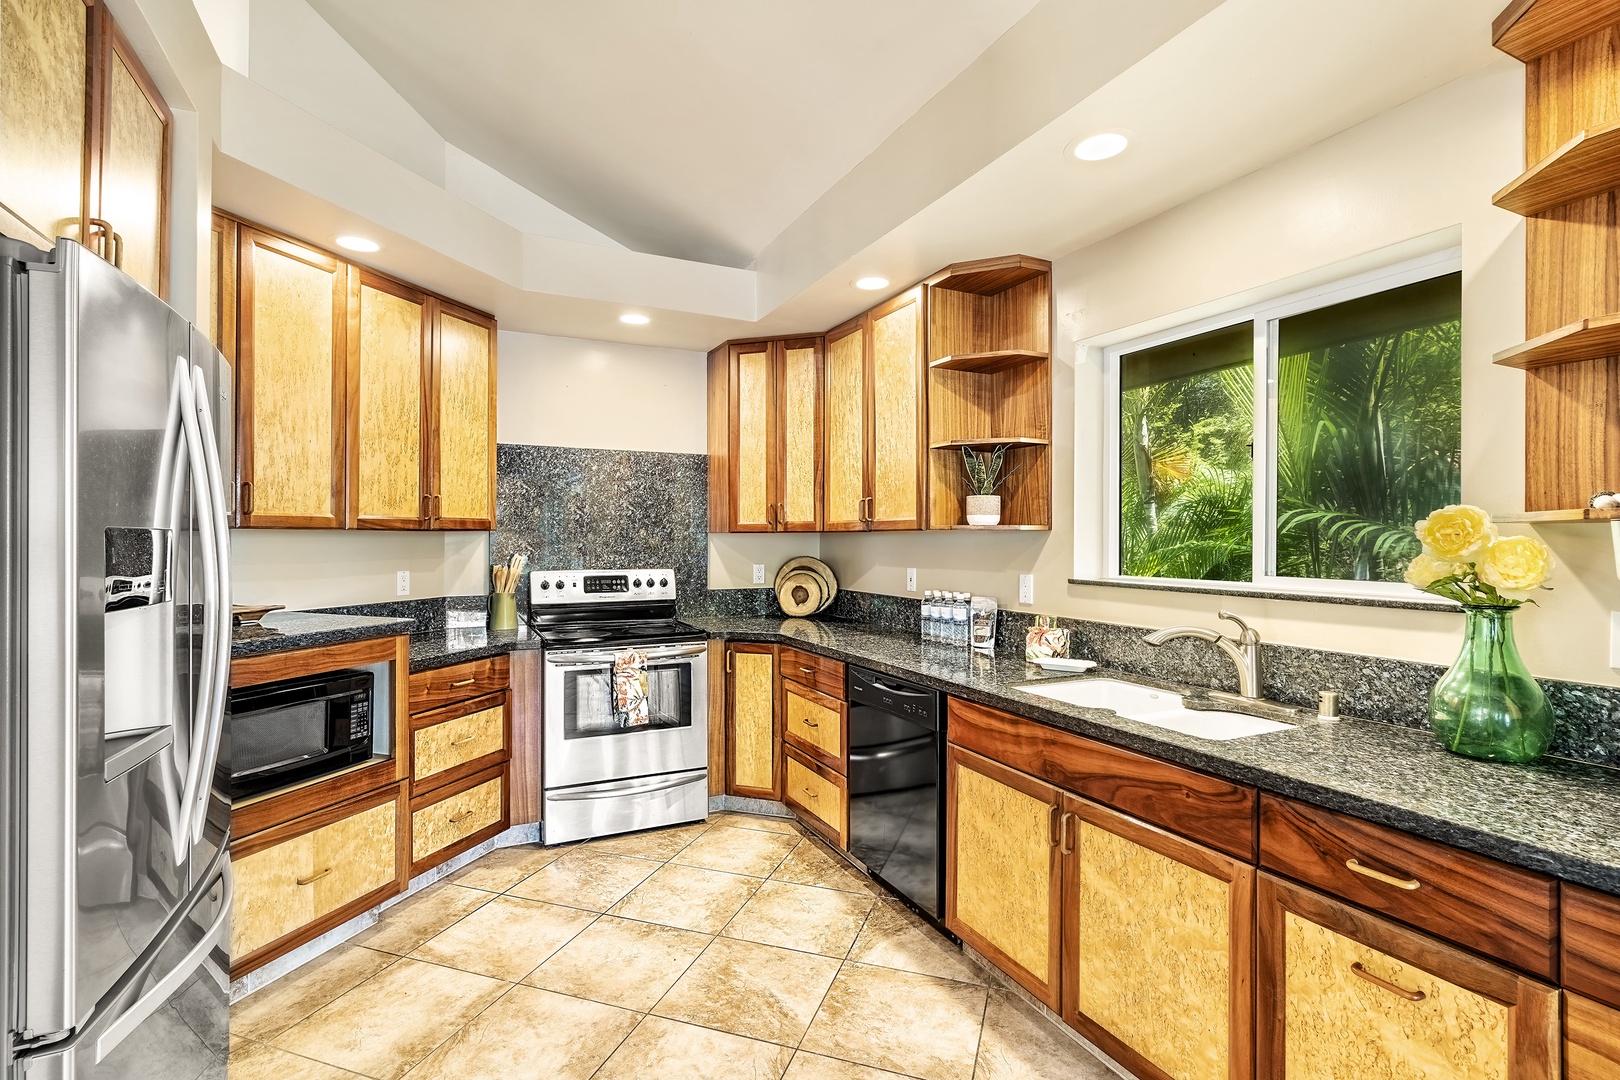 Kailua Kona Vacation Rentals, Lymans Bay Hale - Upgraded kitchen for all your meal preparation needs